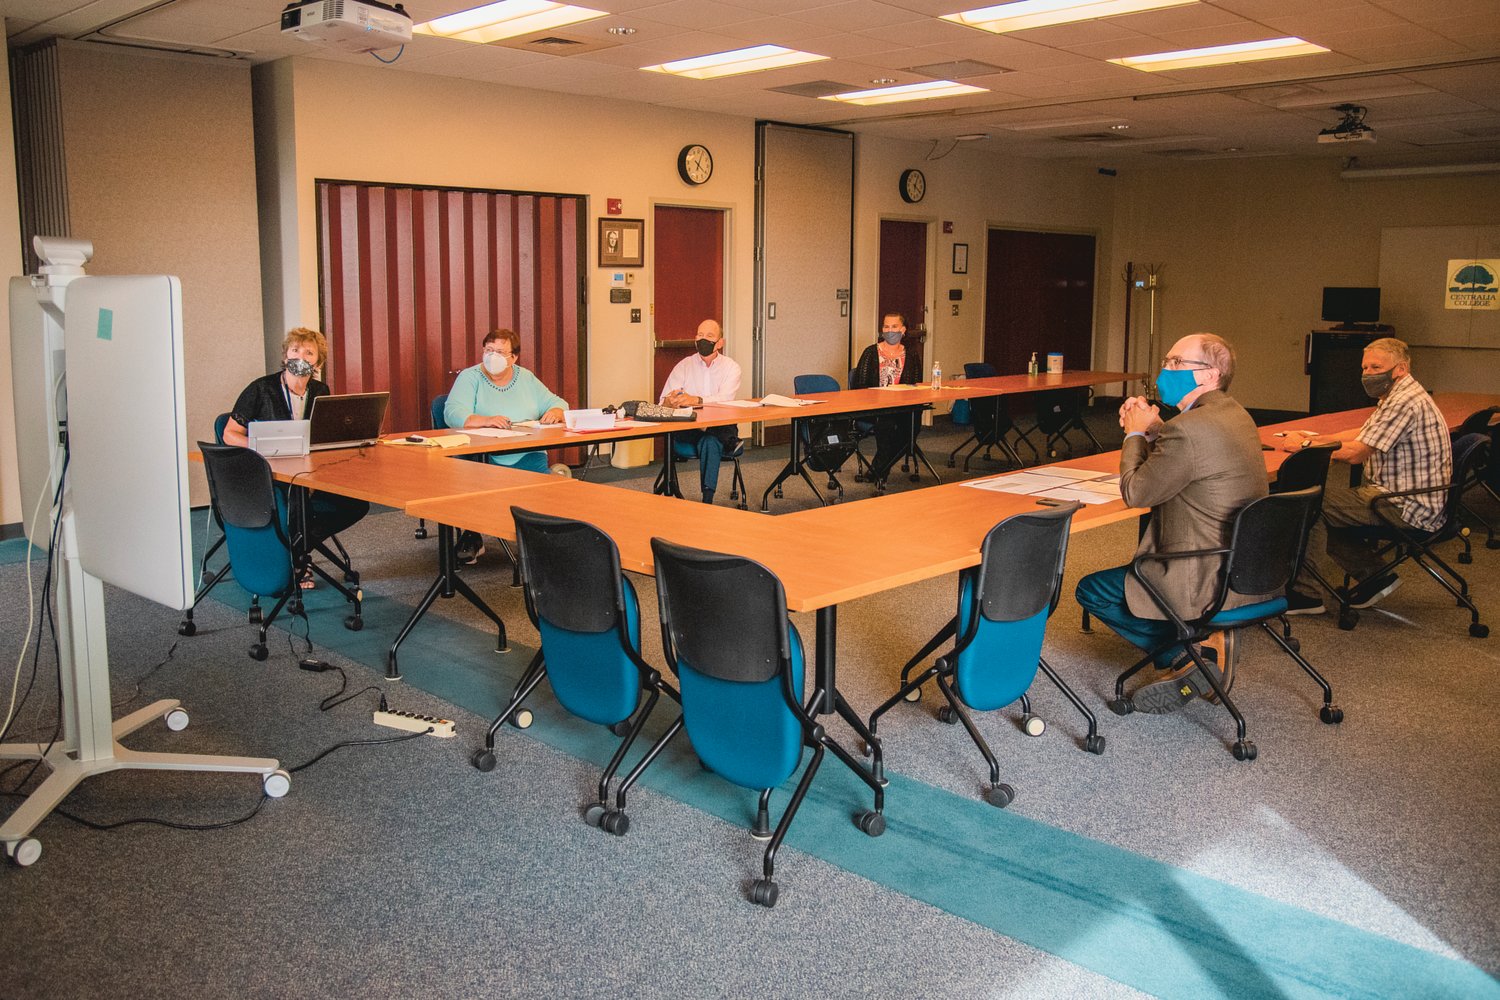 The Centralia College Board of Trustees meets Thursday in the Hanson Administration Building at Centralia College.